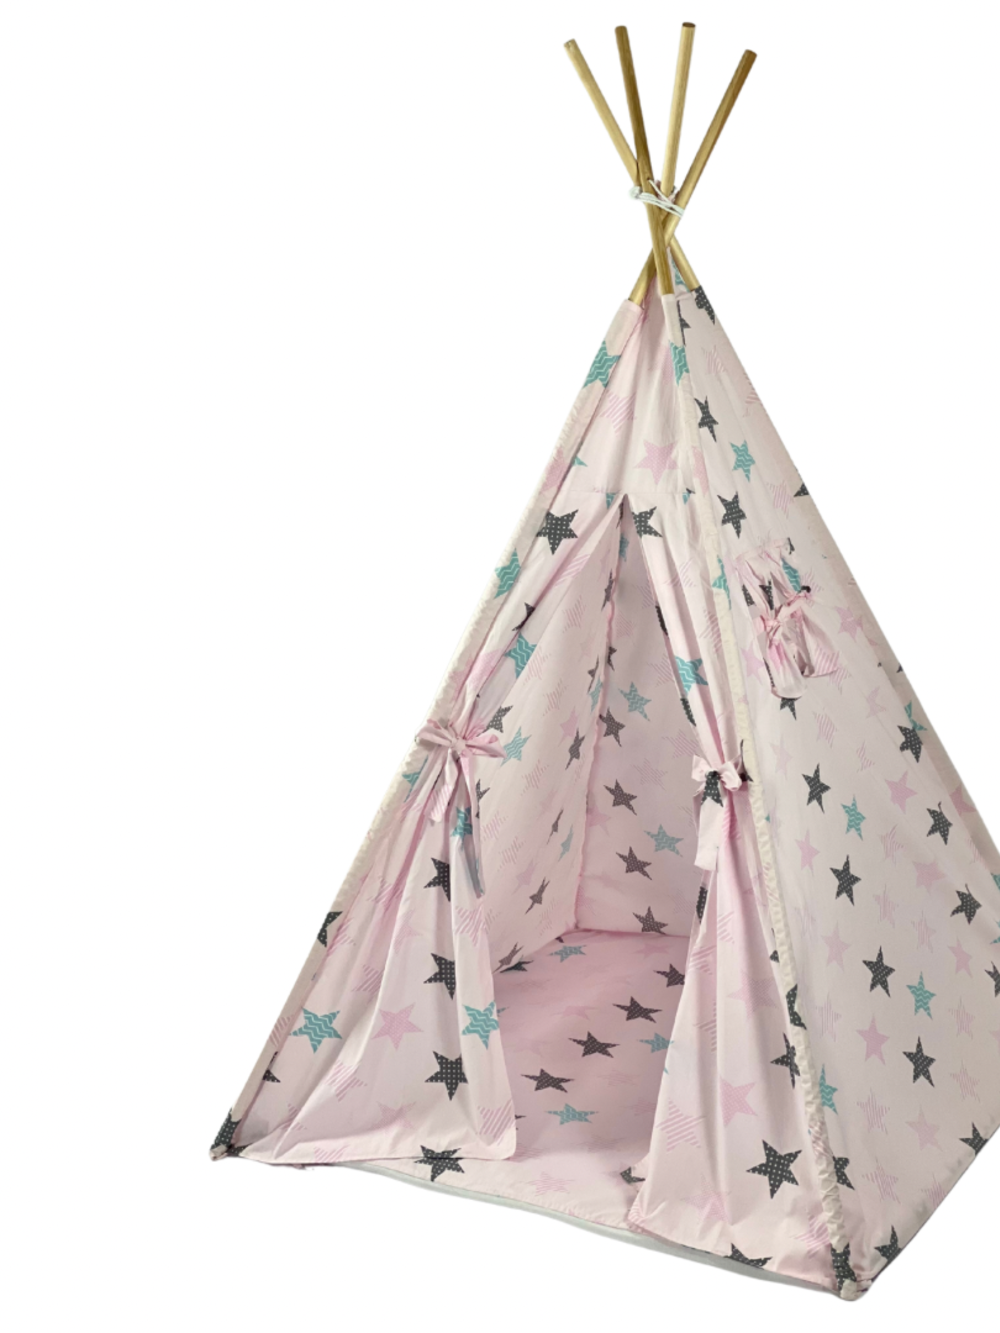 Children's Tent - teepee tent Stars And Pink